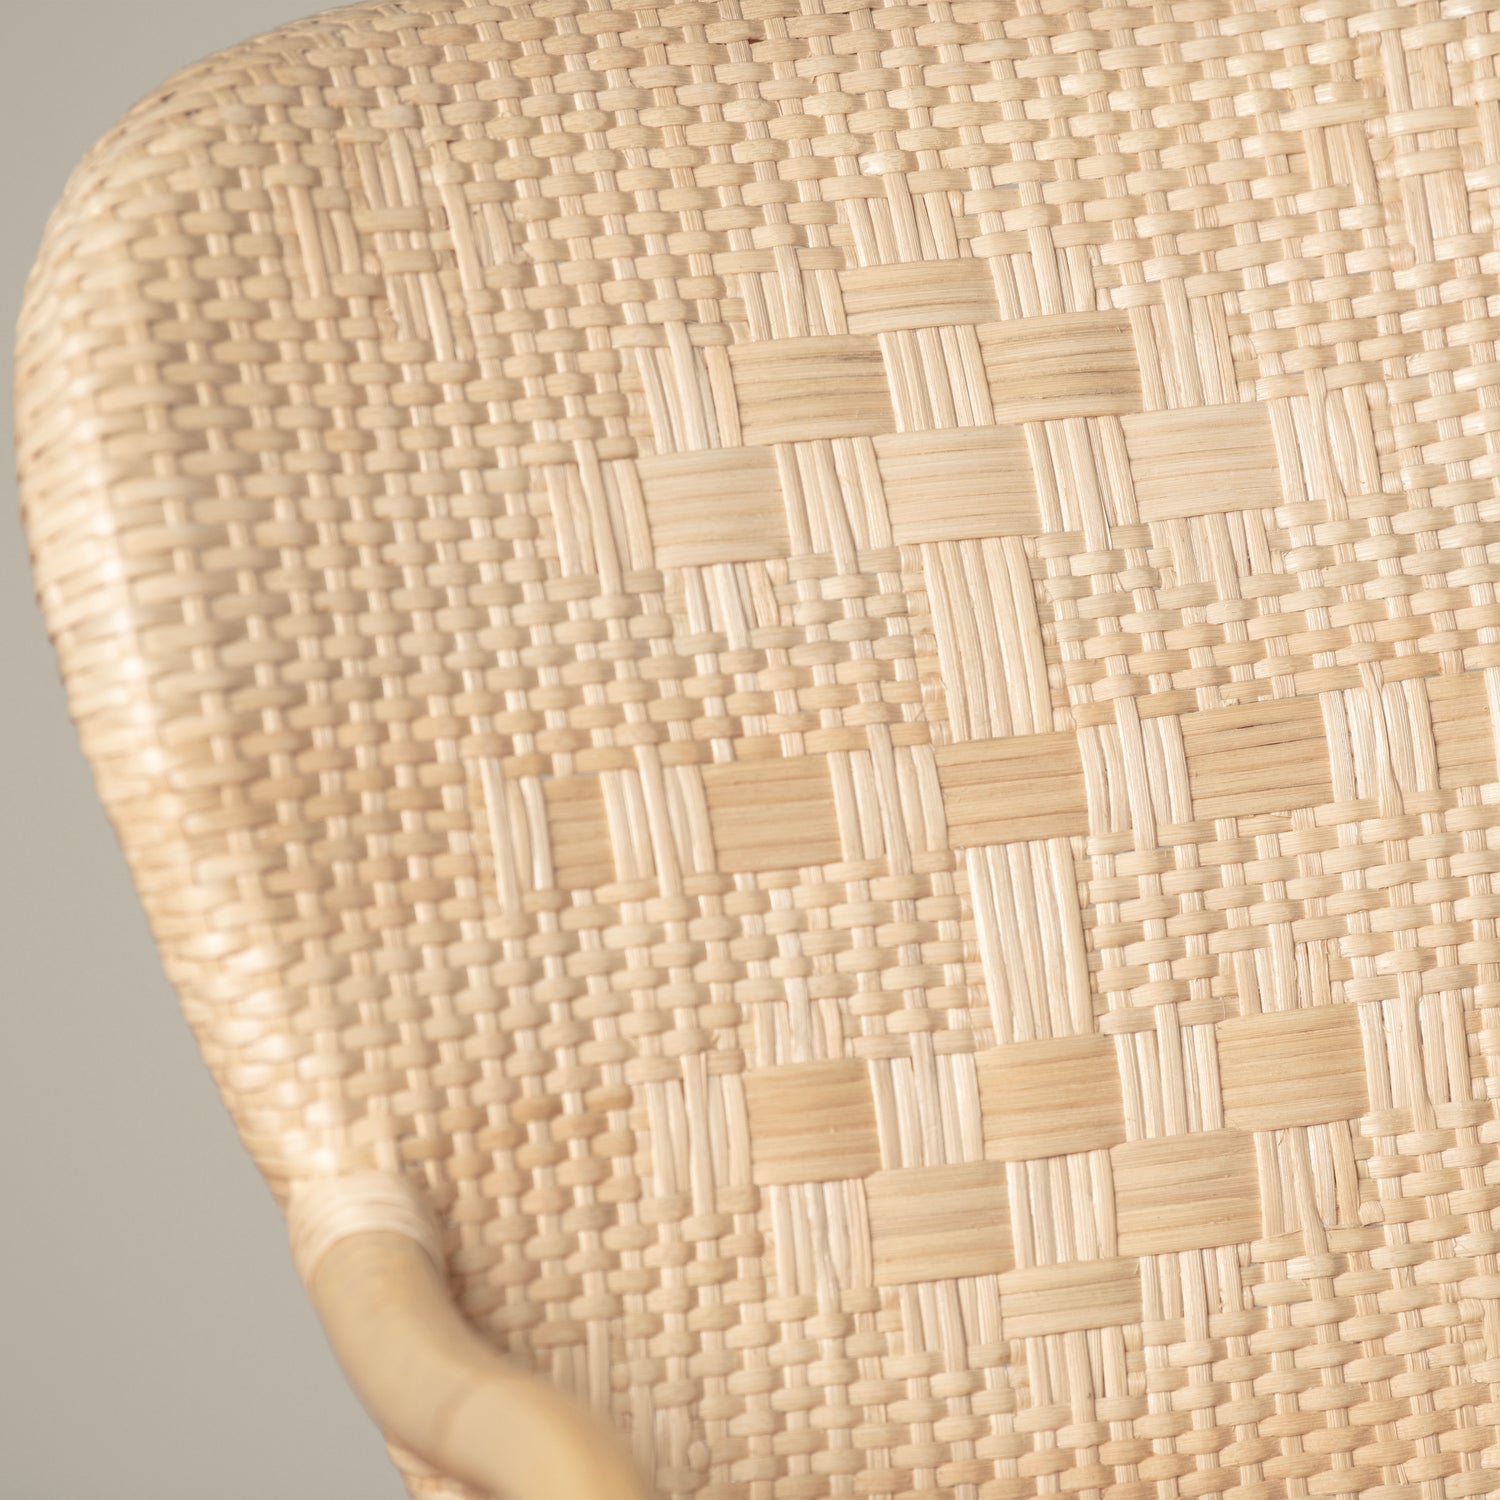 On an ivory background is a rattan chair with a woven rattan seat and backrest. This photo has a close up of the cane detailing. 